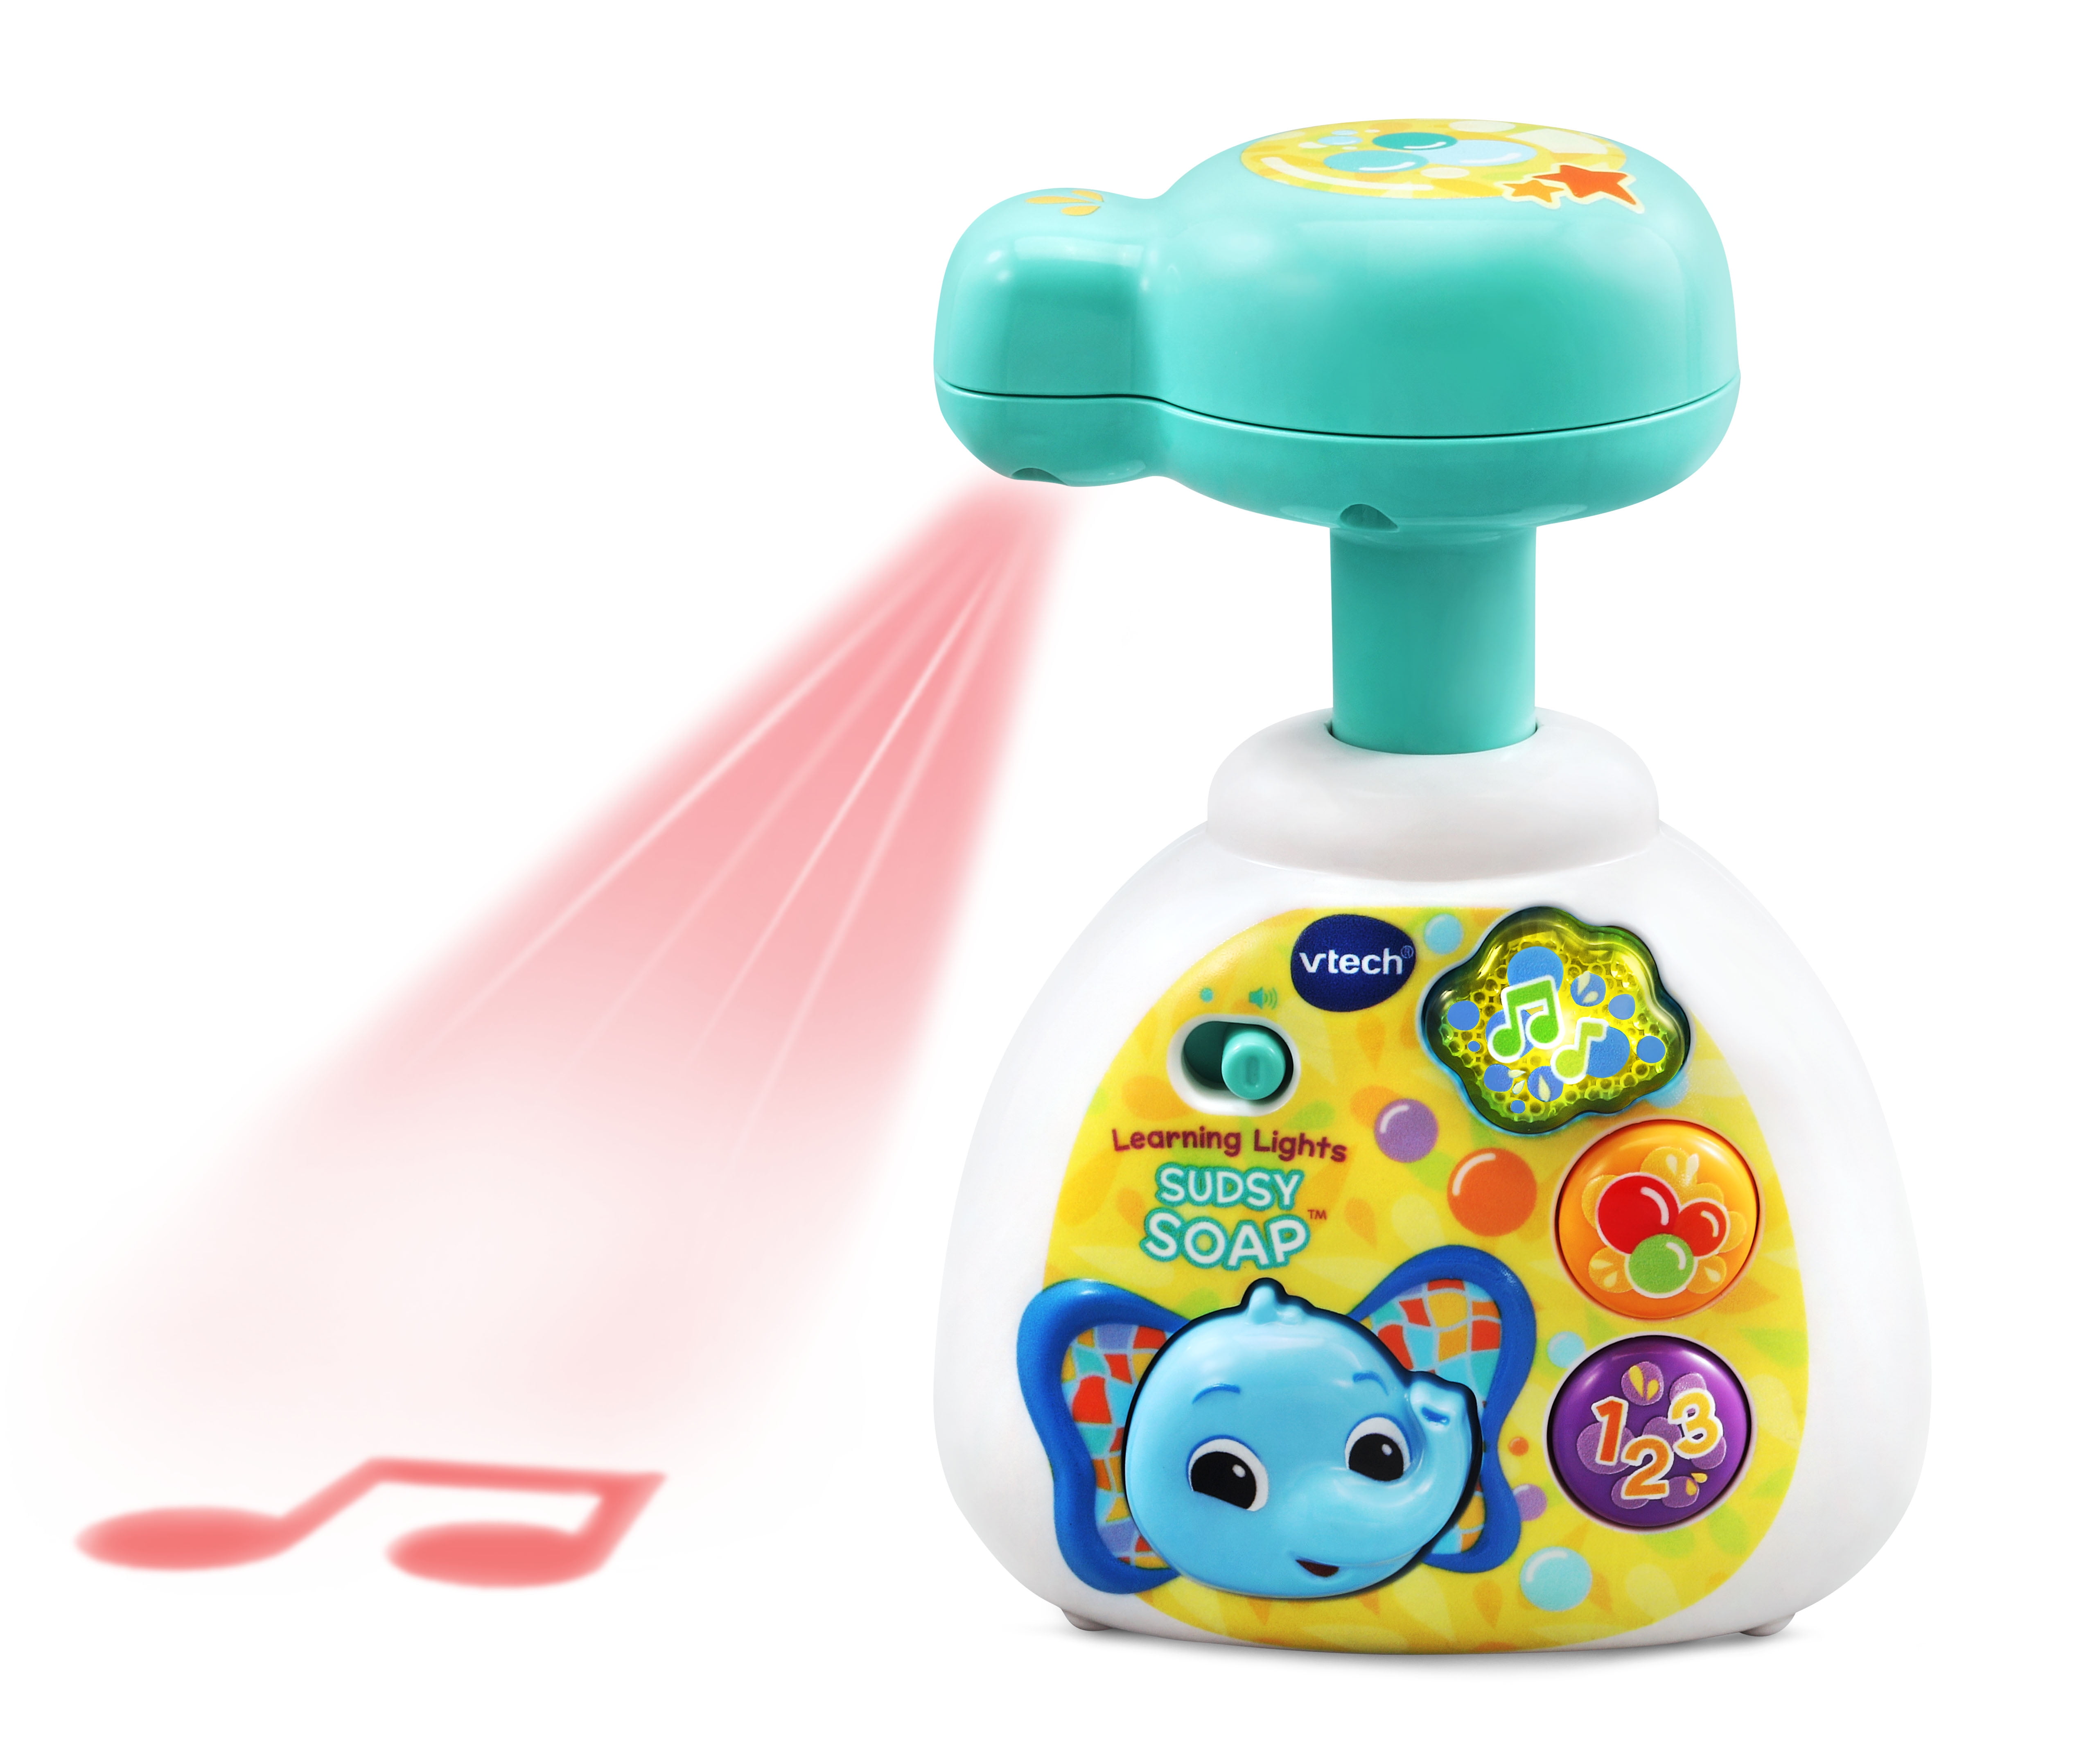 VTech Learning Lights Sudsy Soap Interactive Healthy Habits Toy